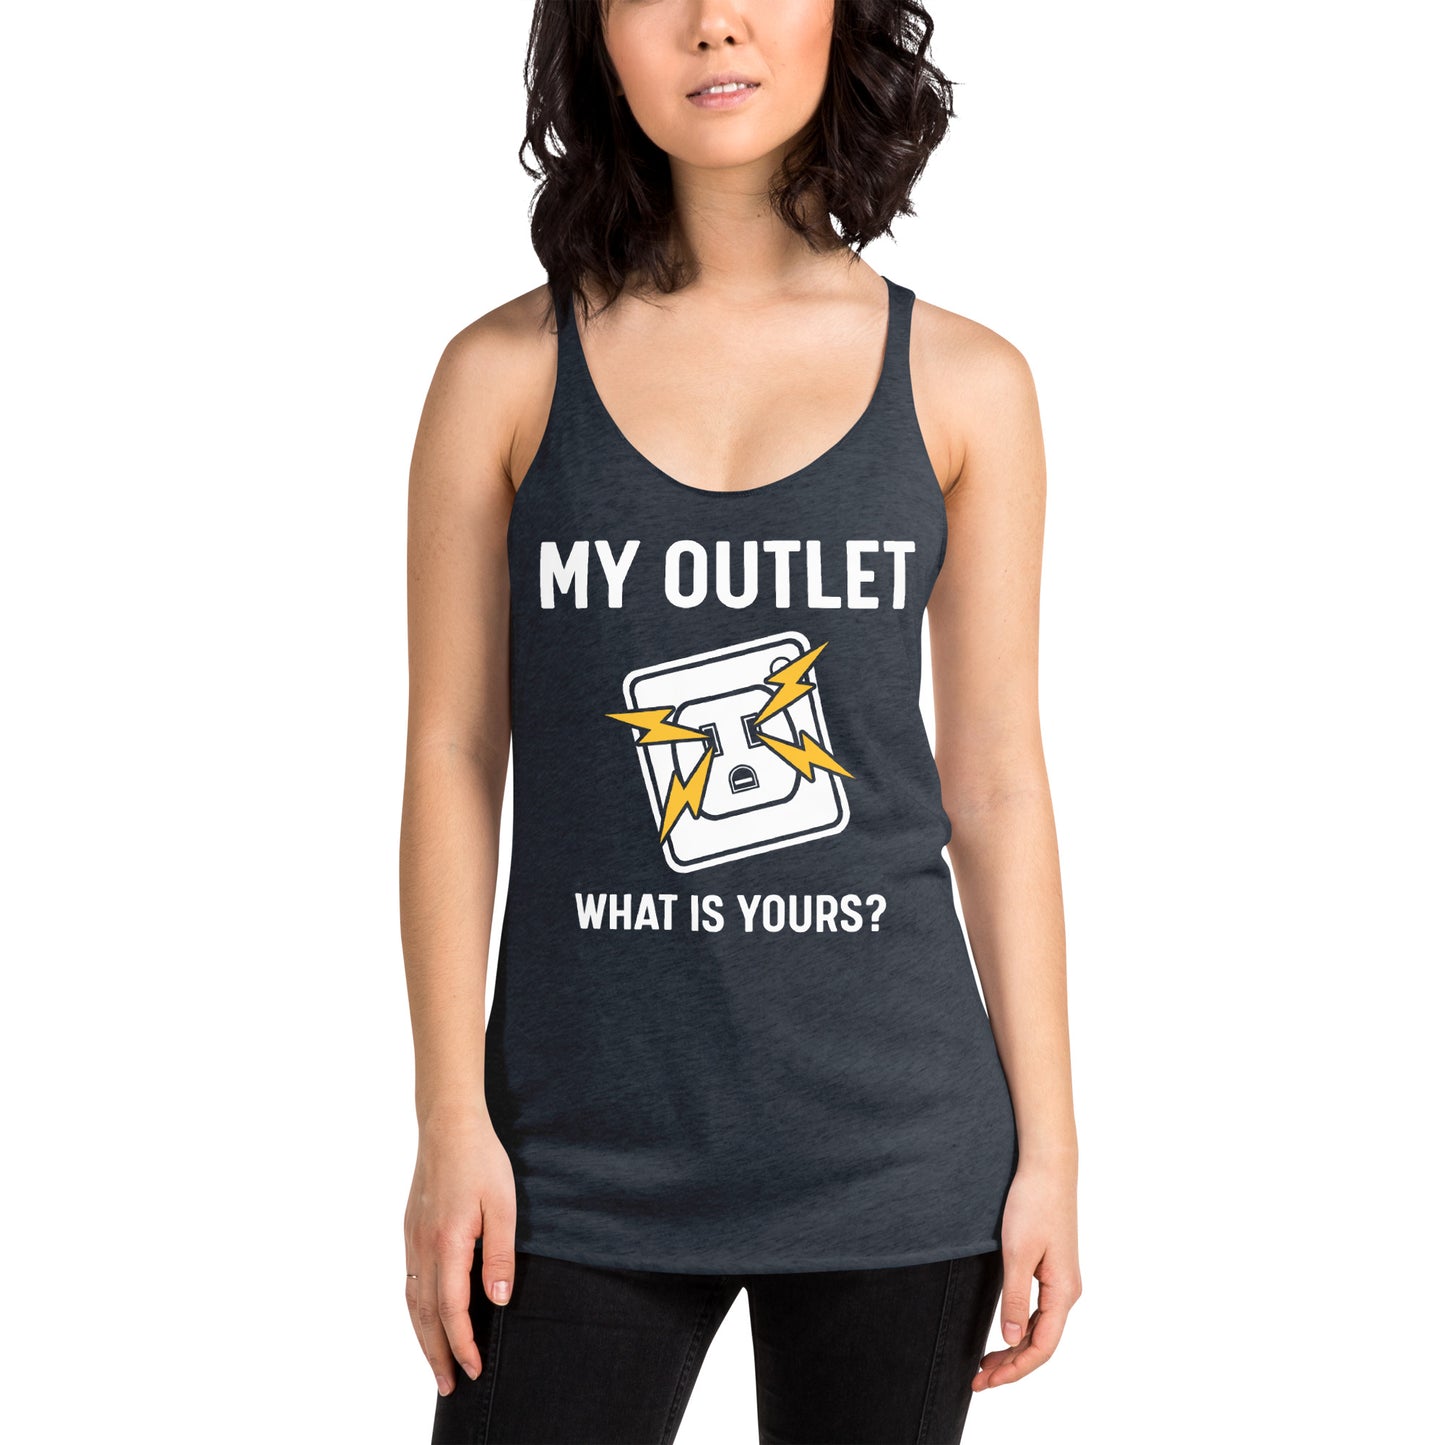 My Outlet What Is Yours ? Women's Racerback Tank